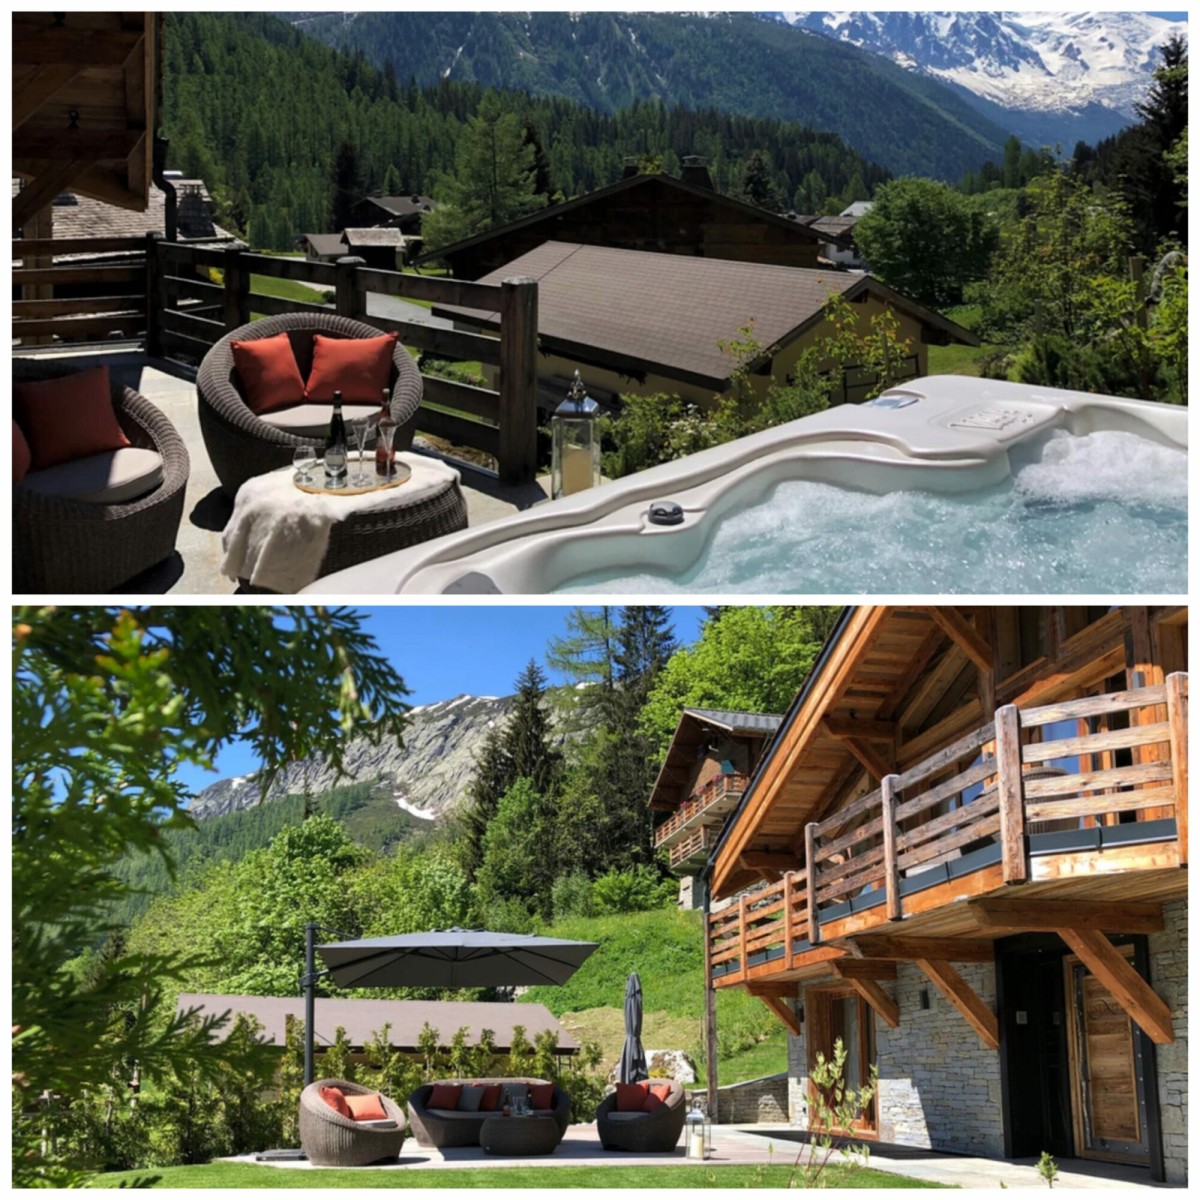 Self-Catered Chalet Infinity is located in the Chamonix hamlets near Argentière with exceptional views of the summits from the outdoor Jacuzzi